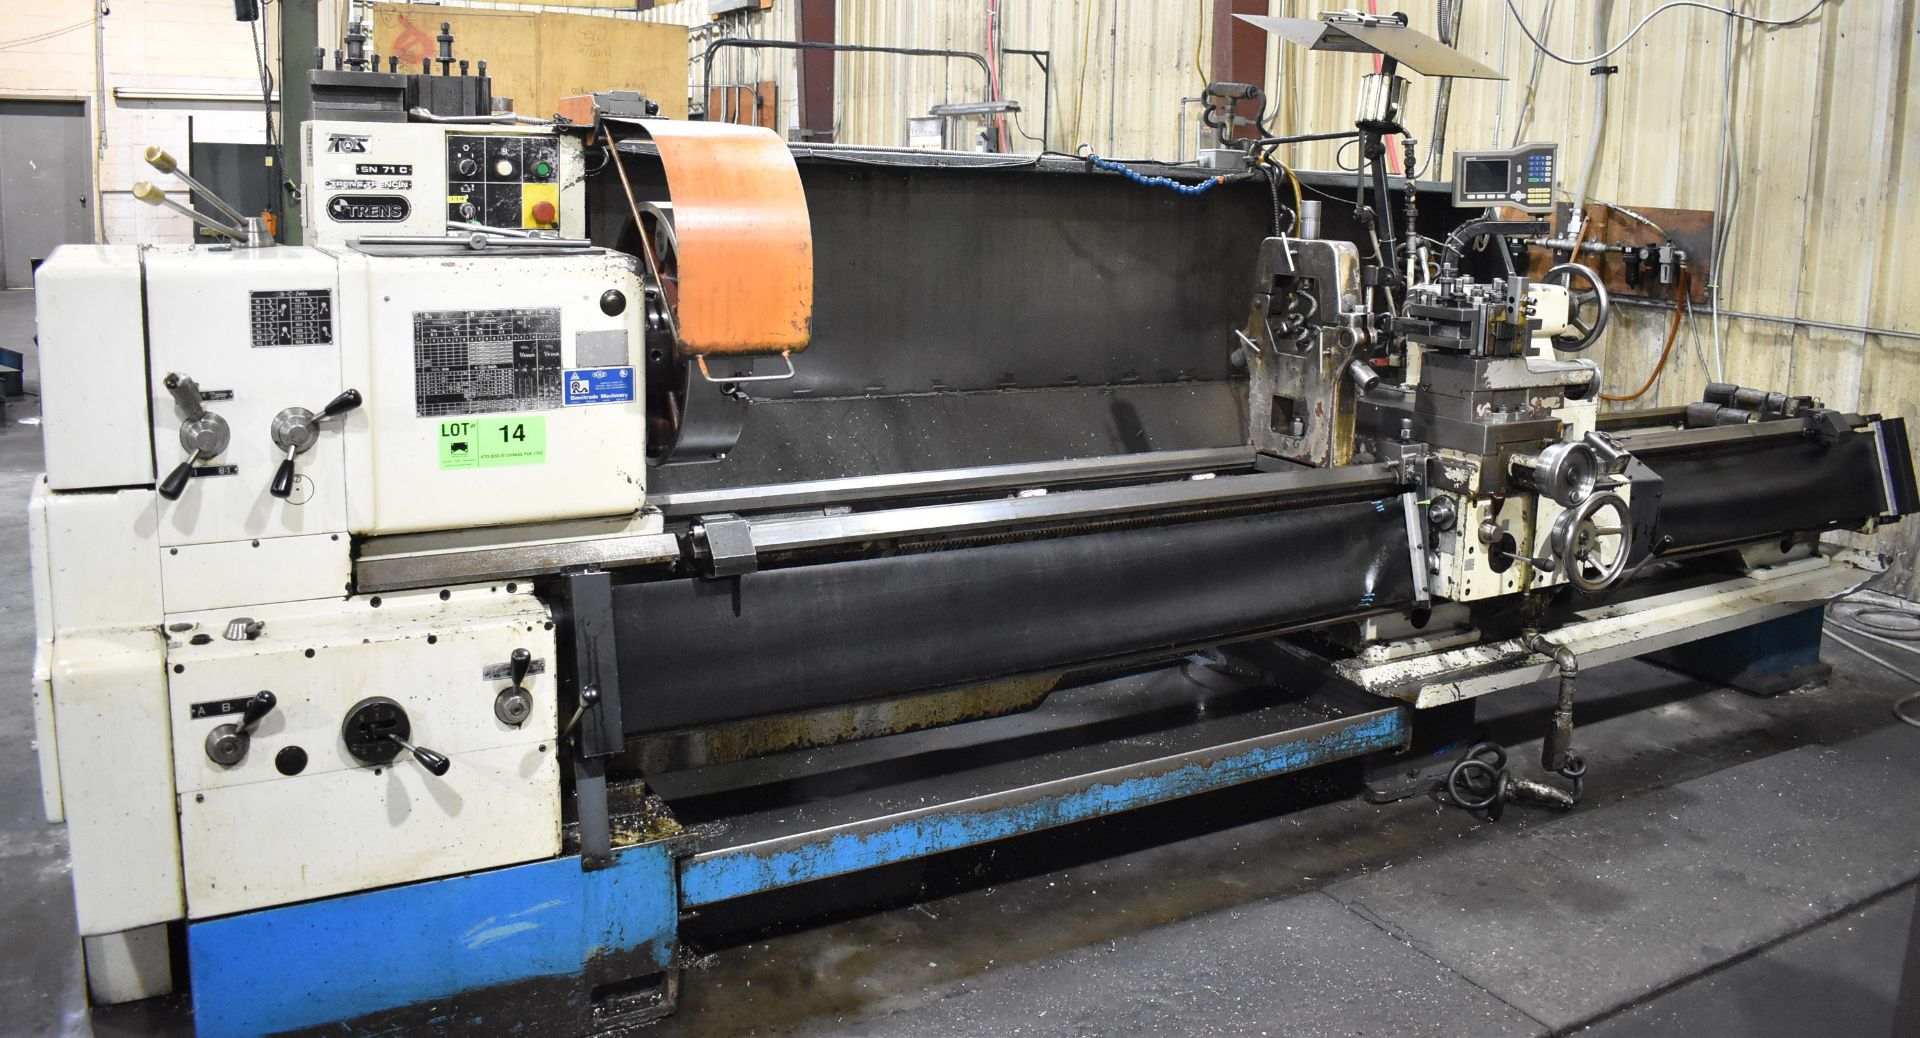 TOS SN 71 C GAP BED ENGINE LATHE WITH 30" SWING, 120" BETWEEN CENTERS, 3" SPINDLE BORE, SPEEDS TO